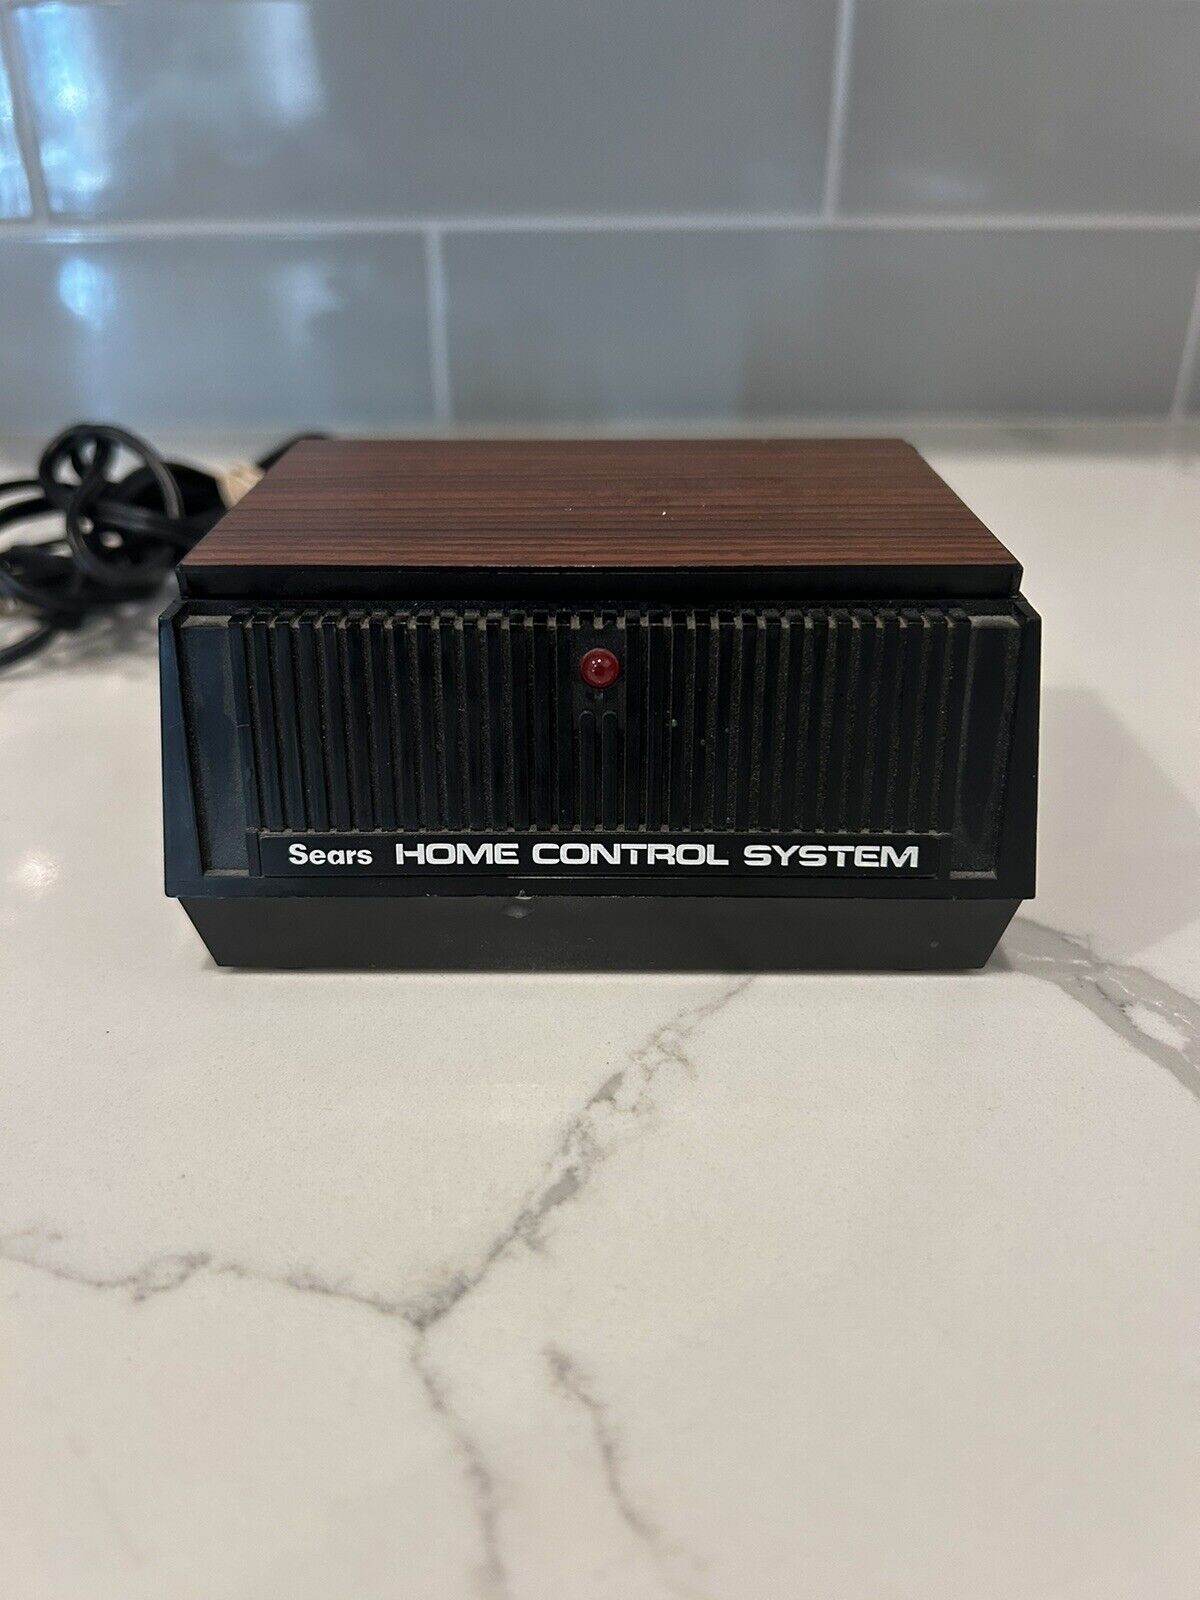 Vintage Sears Home Control System Command Console for X10